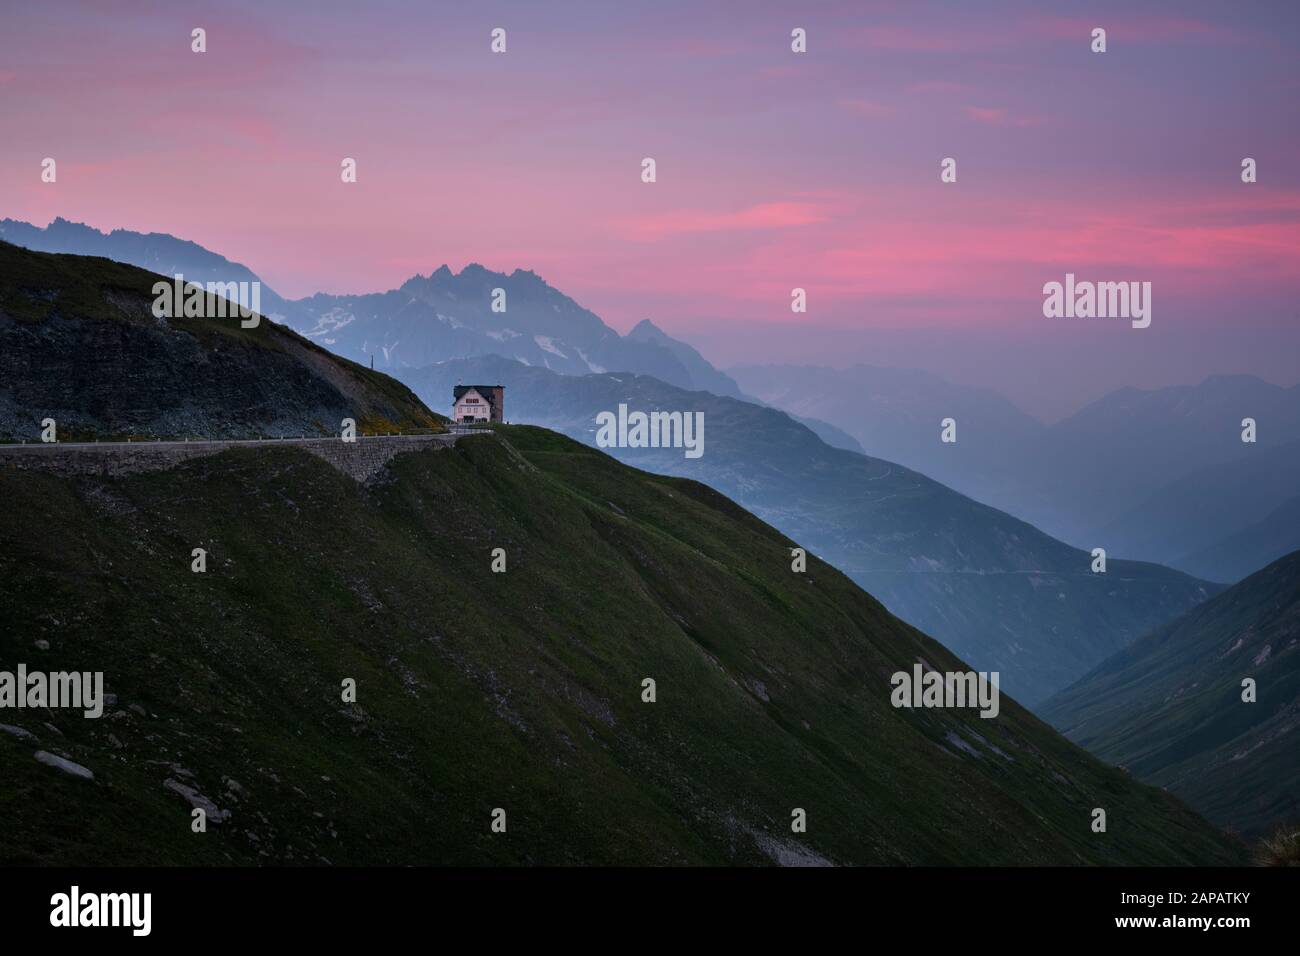 The Hotel Furka Blick on the Furka Pass mountain road at dusk in the Swiss Alps mountain top landscape of Realp, Uri, Switzerland EU Stock Photo